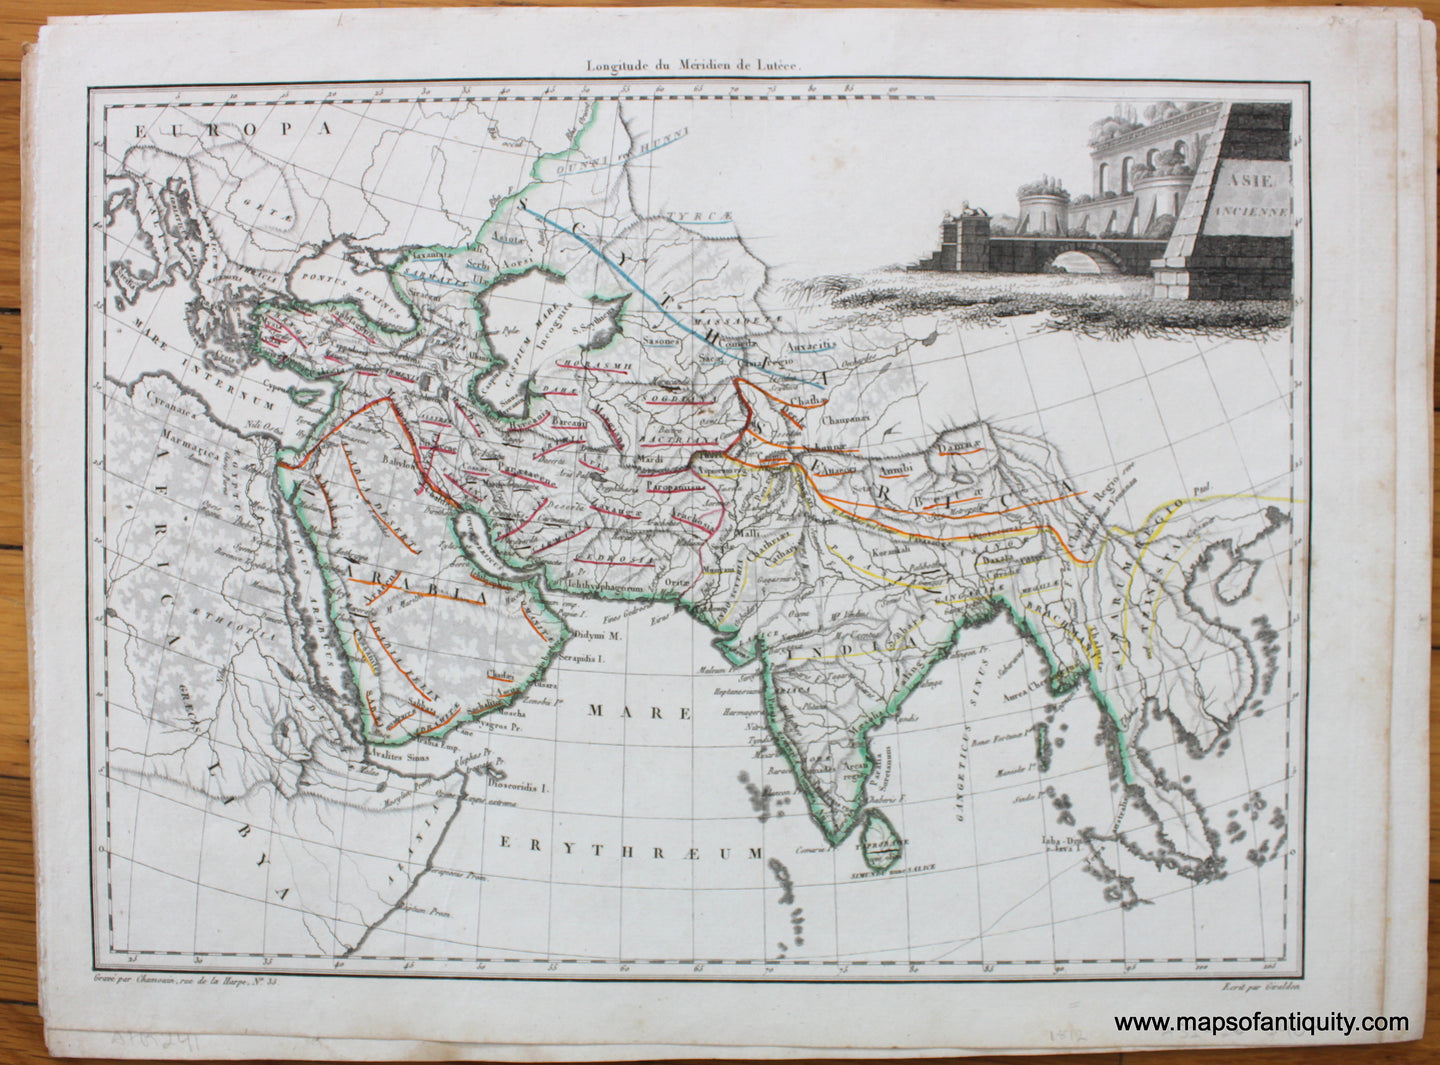 Antique-Hand-Colored-Map-Asie-Ancienne-Ancient-Asia-1812-Malte-Brun-Lapie-1800s-19th-century-Maps-of-Antiquity